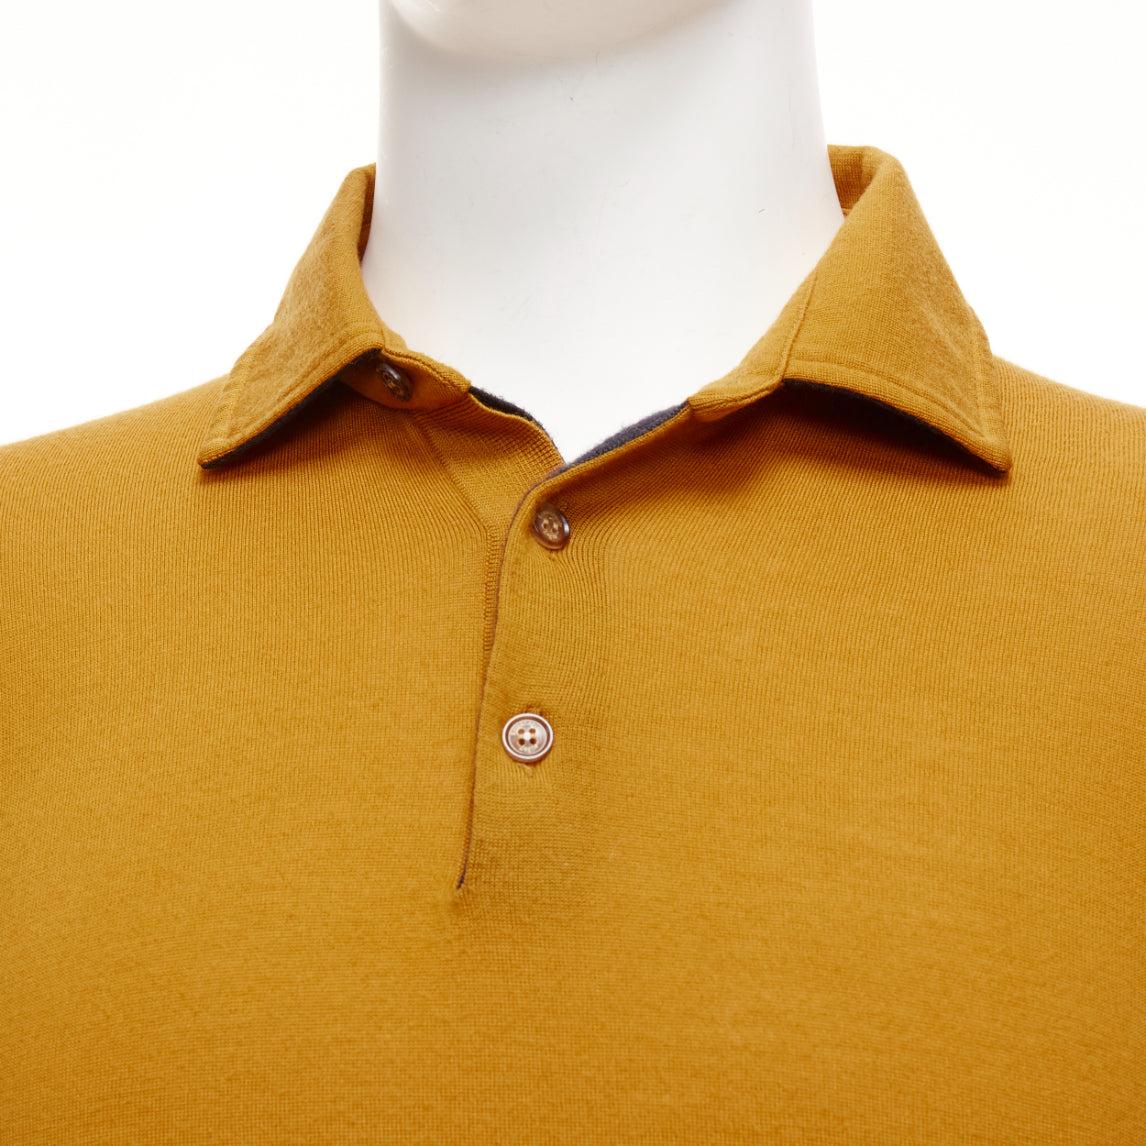 ERMENEGILDO ZEGNA wool cashmere mustard yellow knit polo sweater IT50 L
Reference: JSLE/A00125
Brand: Ermenegildo Zegna
Material: Wood, Cashmere
Color: Yellow
Pattern: Solid
Closure: Button
Made in: Italy

CONDITION:
Condition: Good, this item was